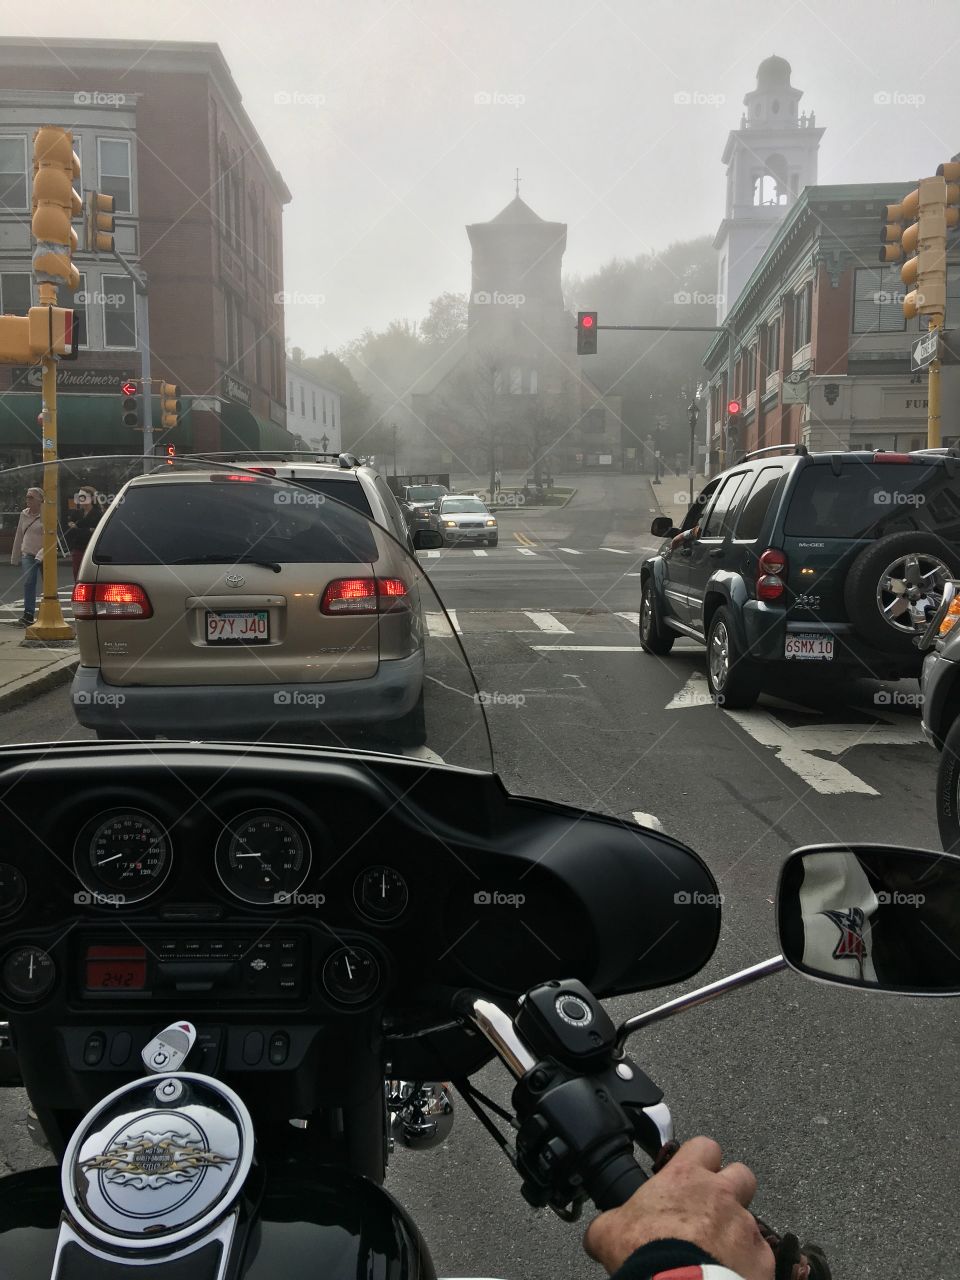 Saw work & returning home thru Plymouth MA🇺🇸, Church Square, a historic area seen through the mist ahead of the traffic lights🚦